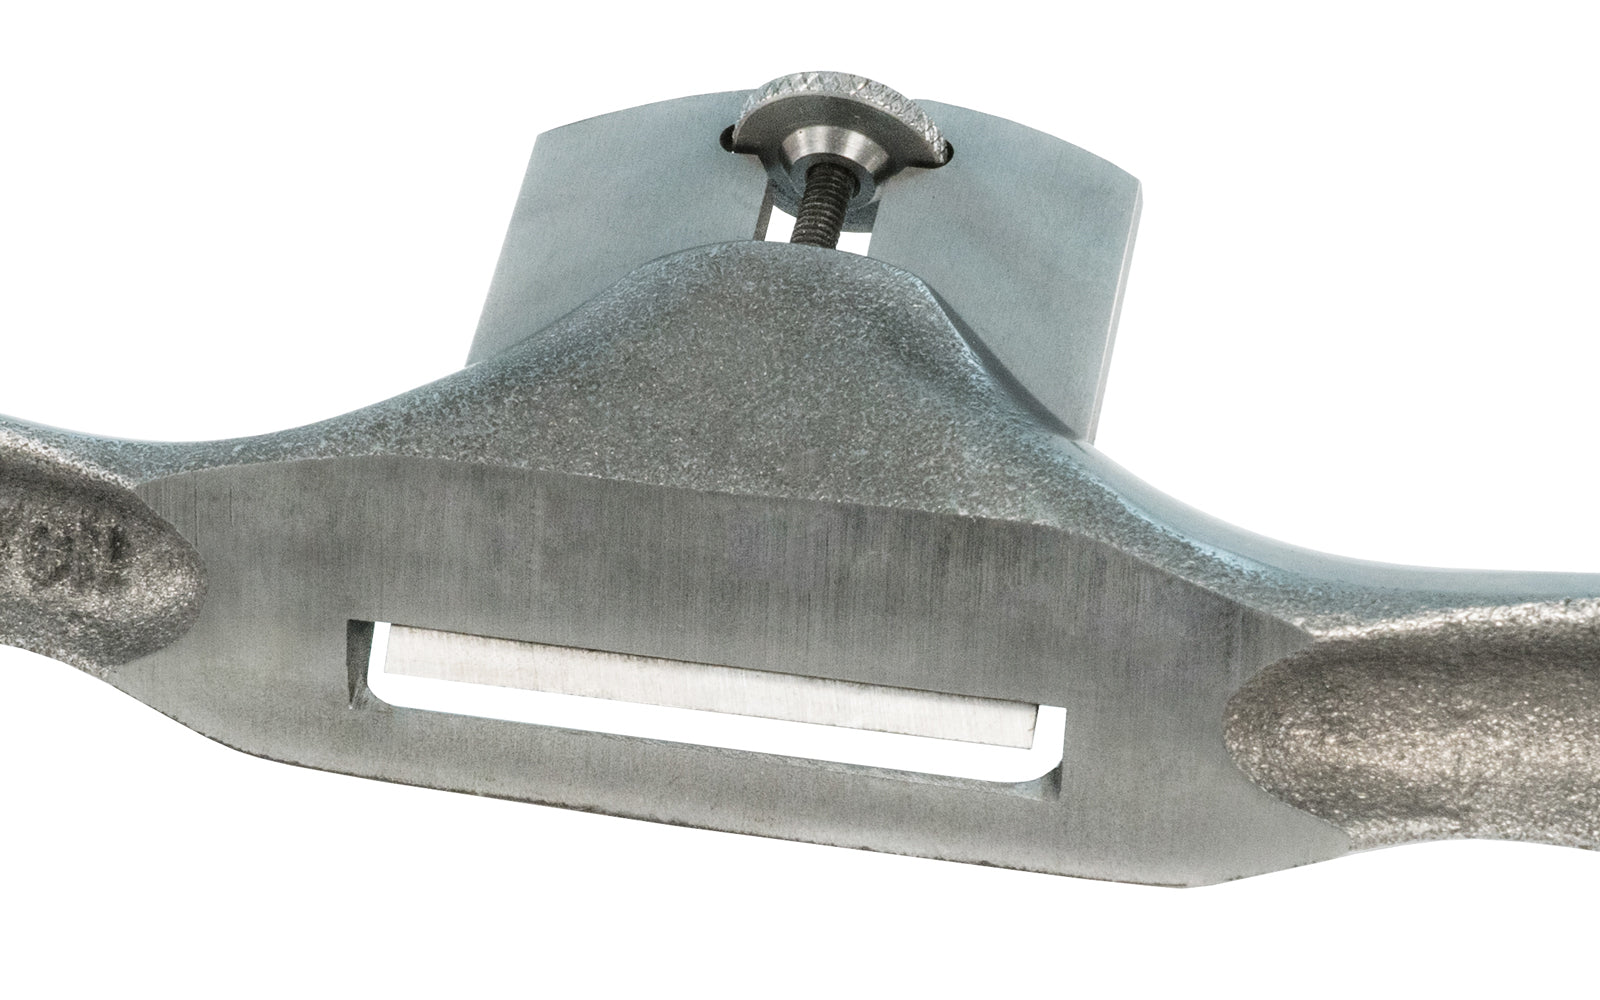 Clifton 600 Straight Spokeshave is made from very tough spheridal graphite/malleable iron. Cryogenically treated .01 tool steel HRC 59-61. Fully adjustable blade for depth of cut, resting at 25° angle. 2-1/8